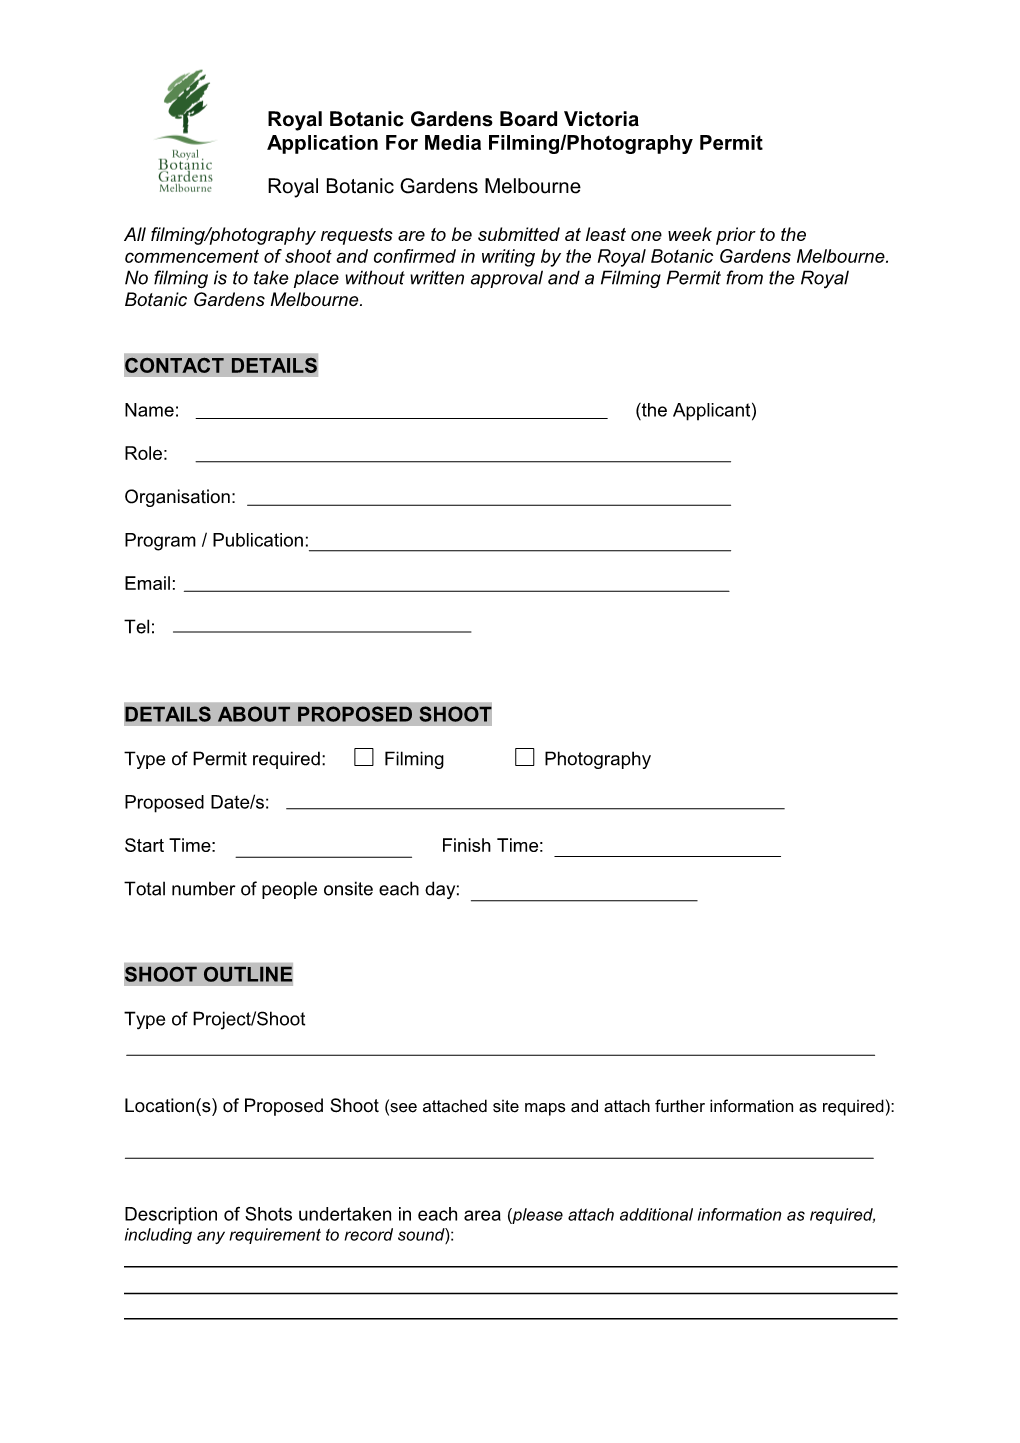 Please Submit Completed Forms to the Marketing and Communications Branch